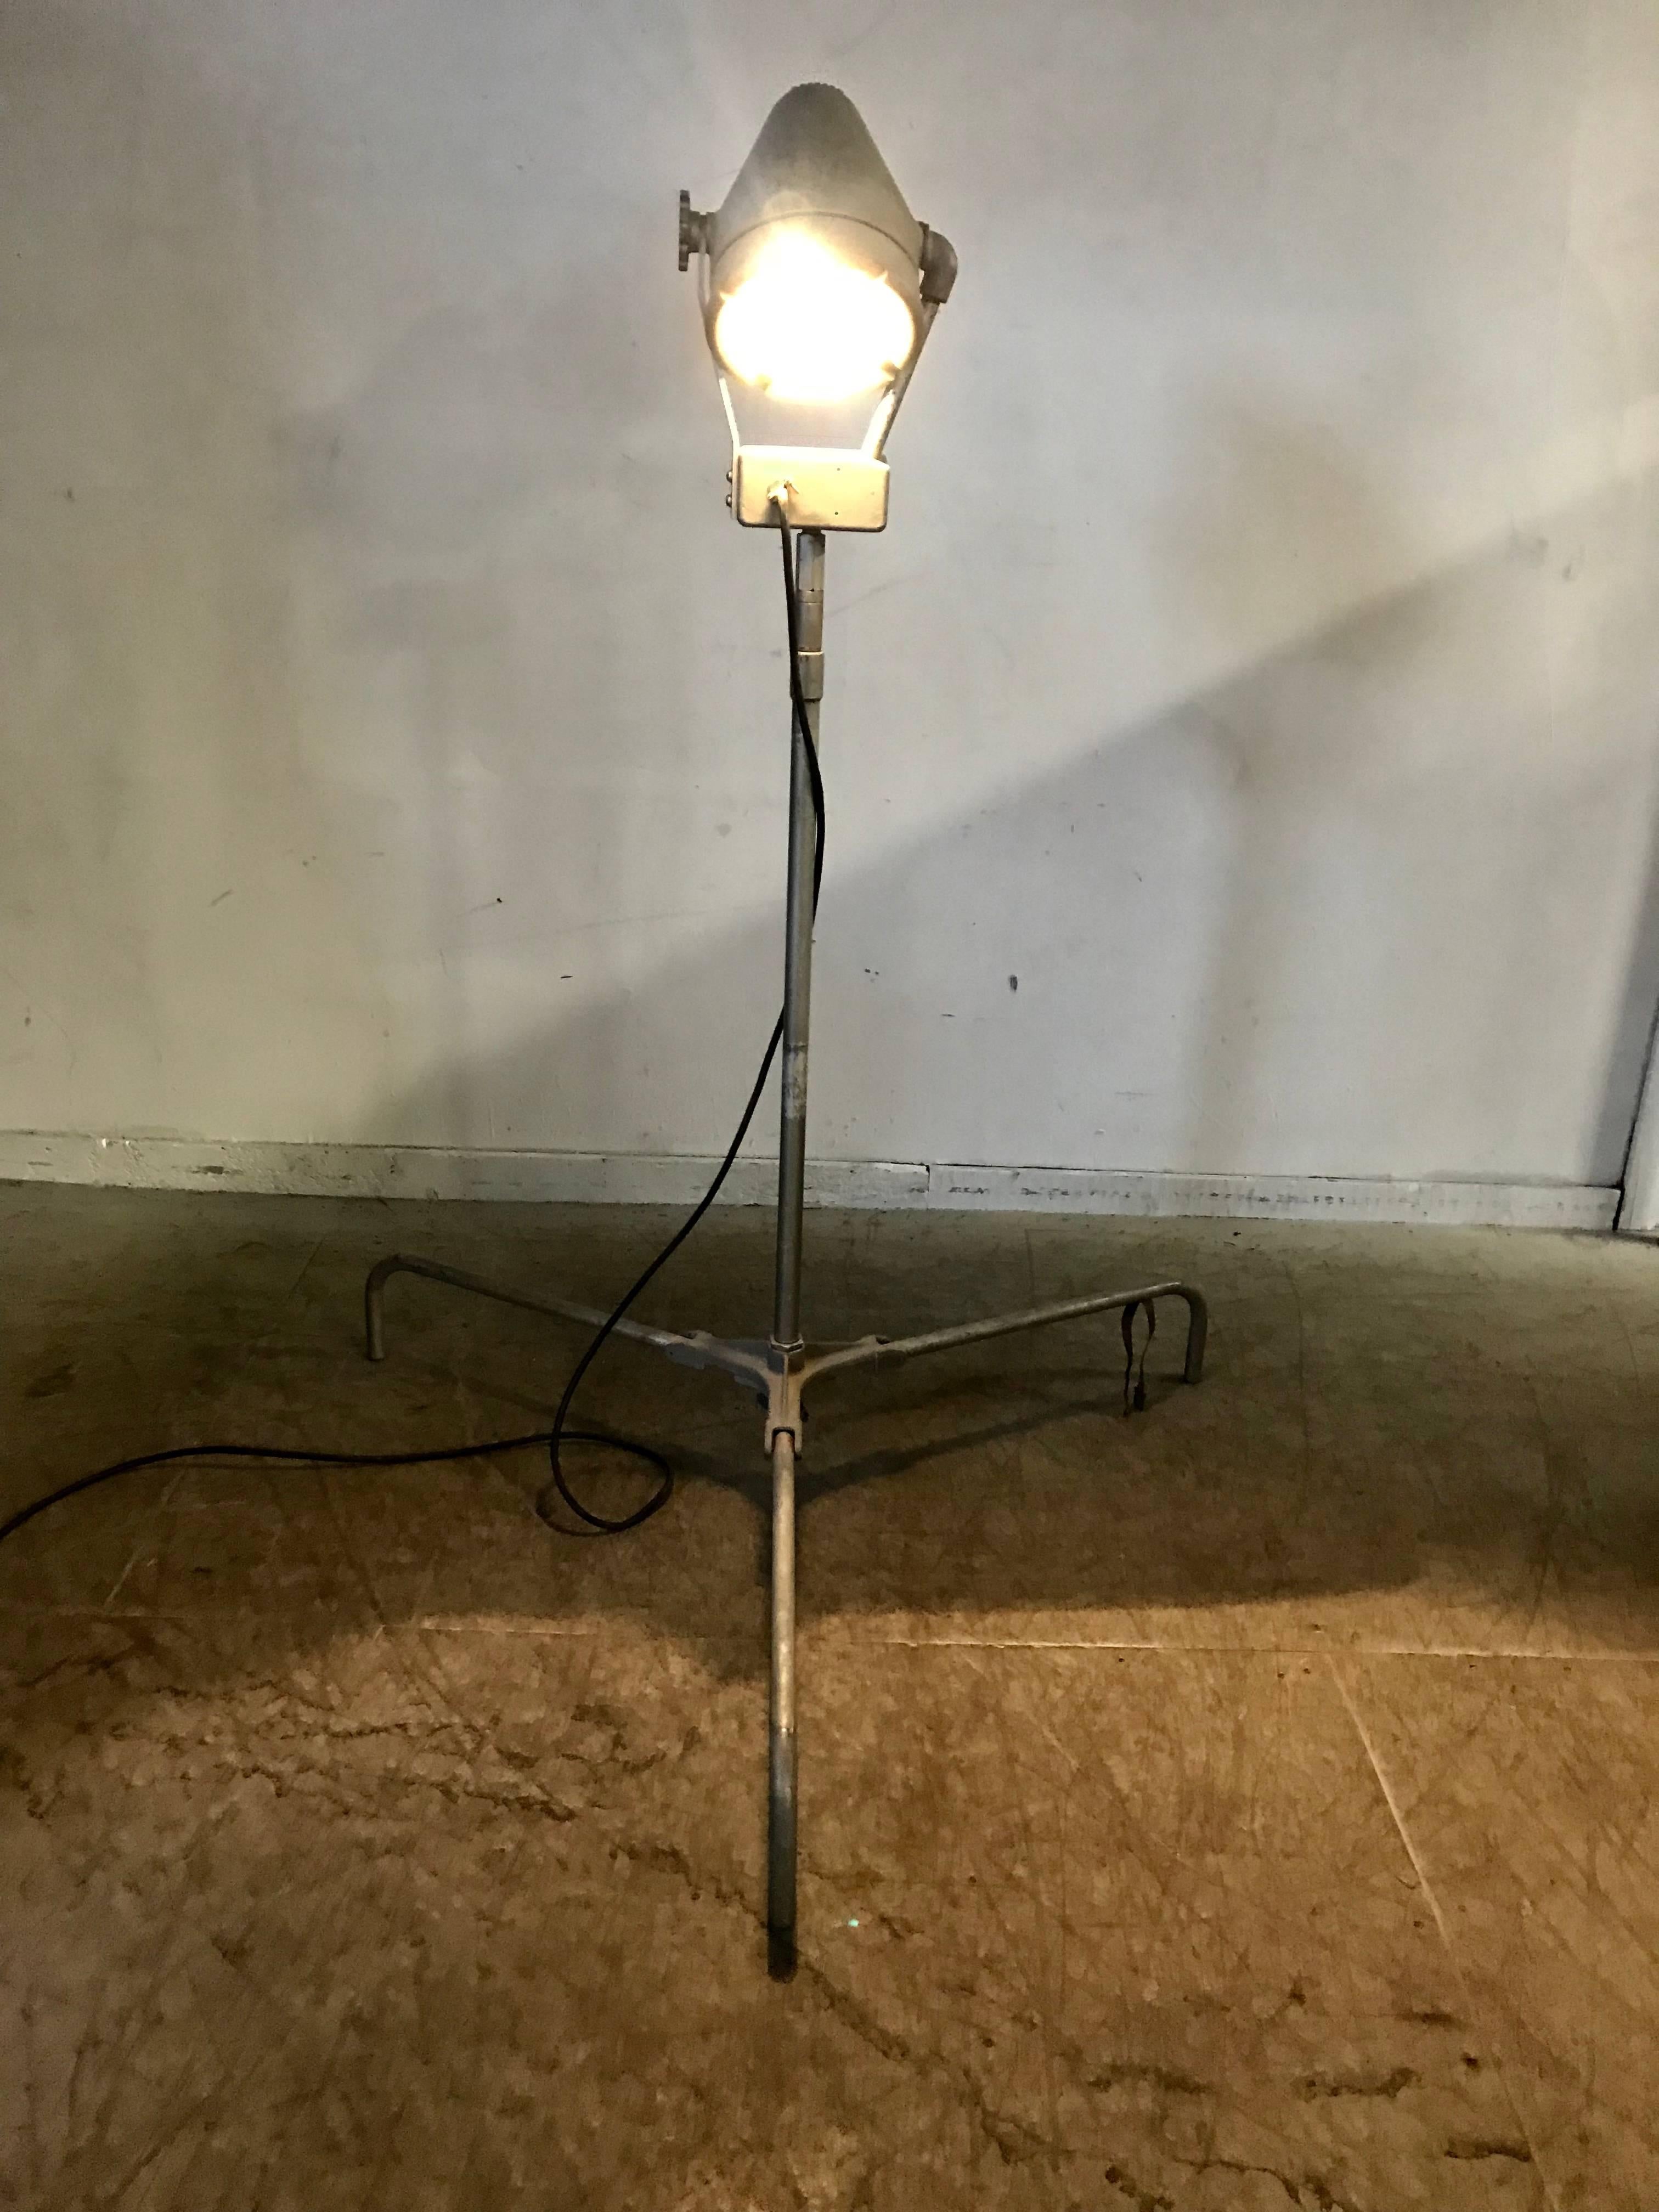 Industrial Cast Aluminum adjustable floor lamp,,Wonderful design,,bullet lamp head,Surely inspired by Buck Rogers modernist streamline design.Lamp adjustable in height from 70 inches in height to over 10 feet fully extended,Tripod  Legs can be